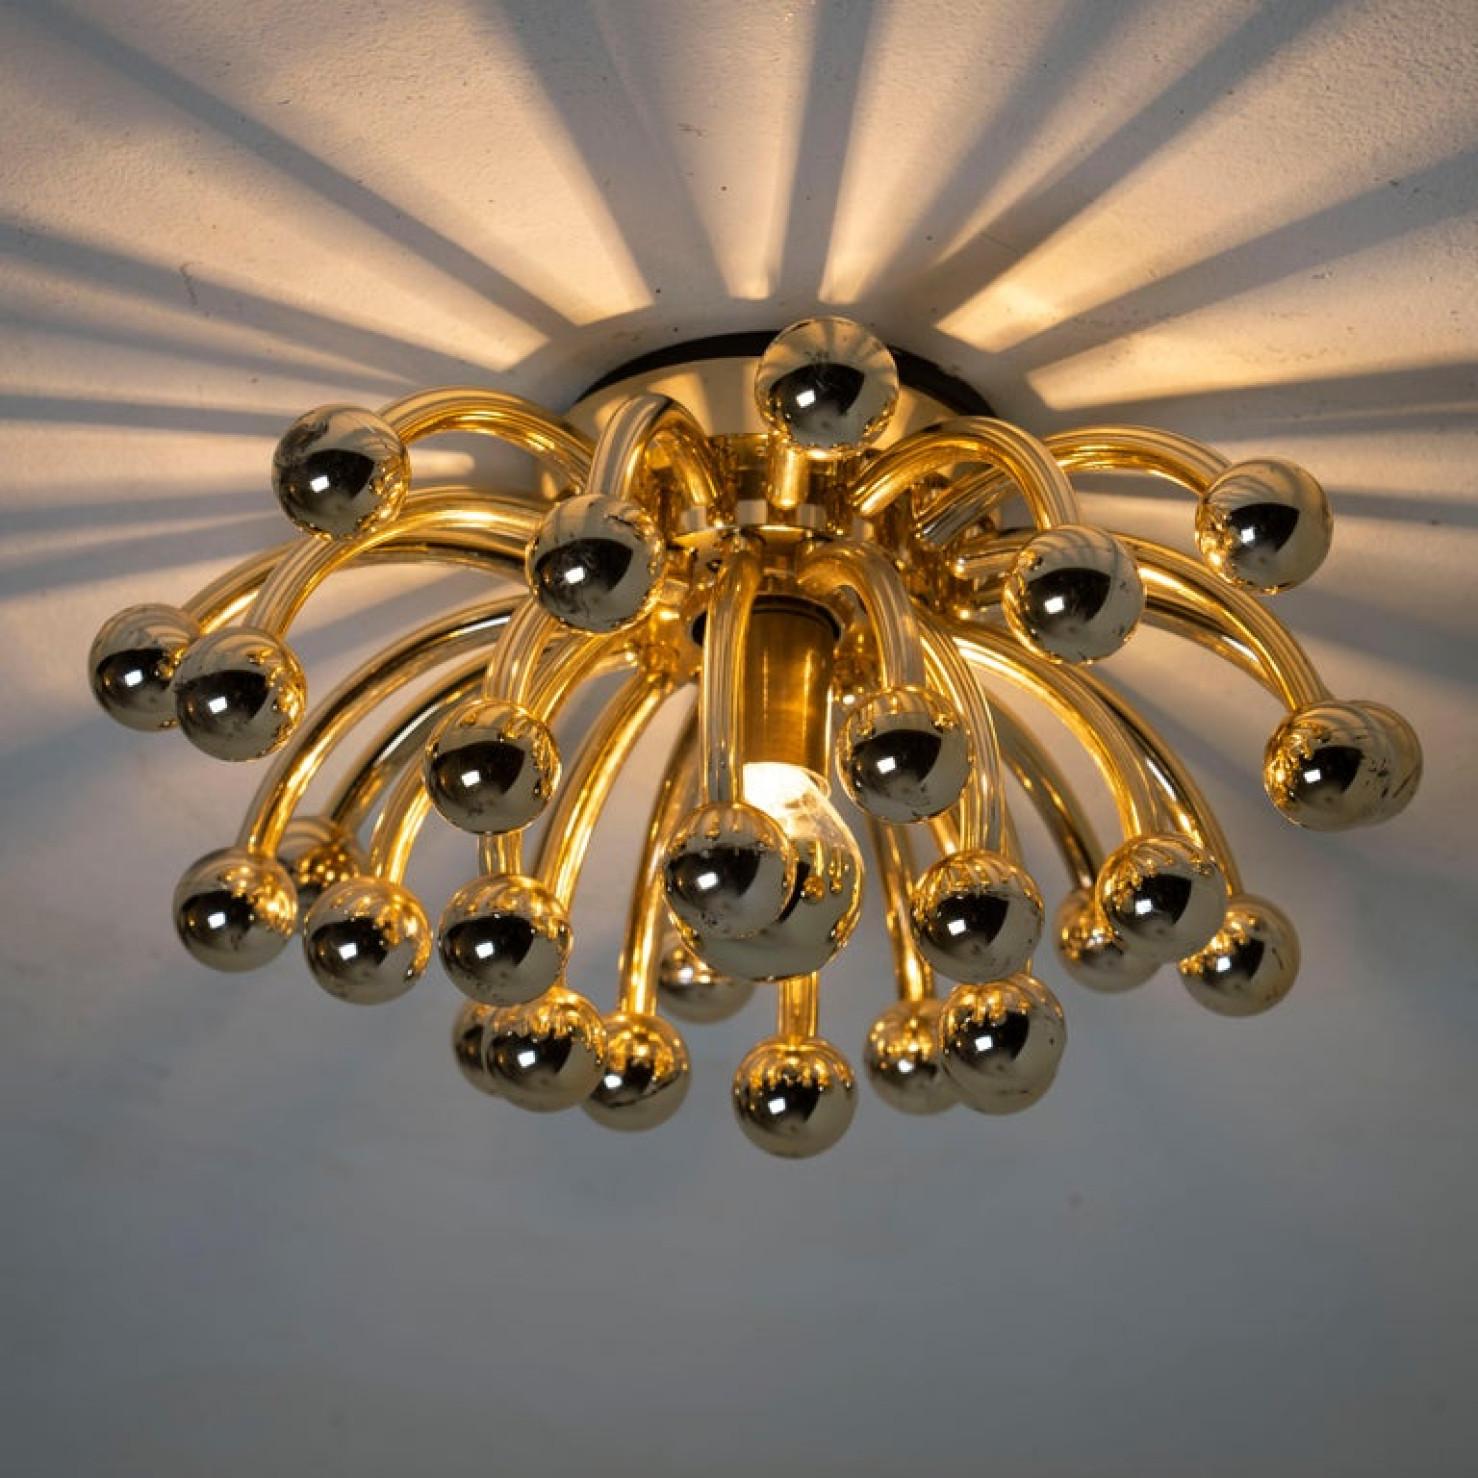 1 of the 4 Valenti Luce Pistillino Wall Lights, Italy, 1970 For Sale 4